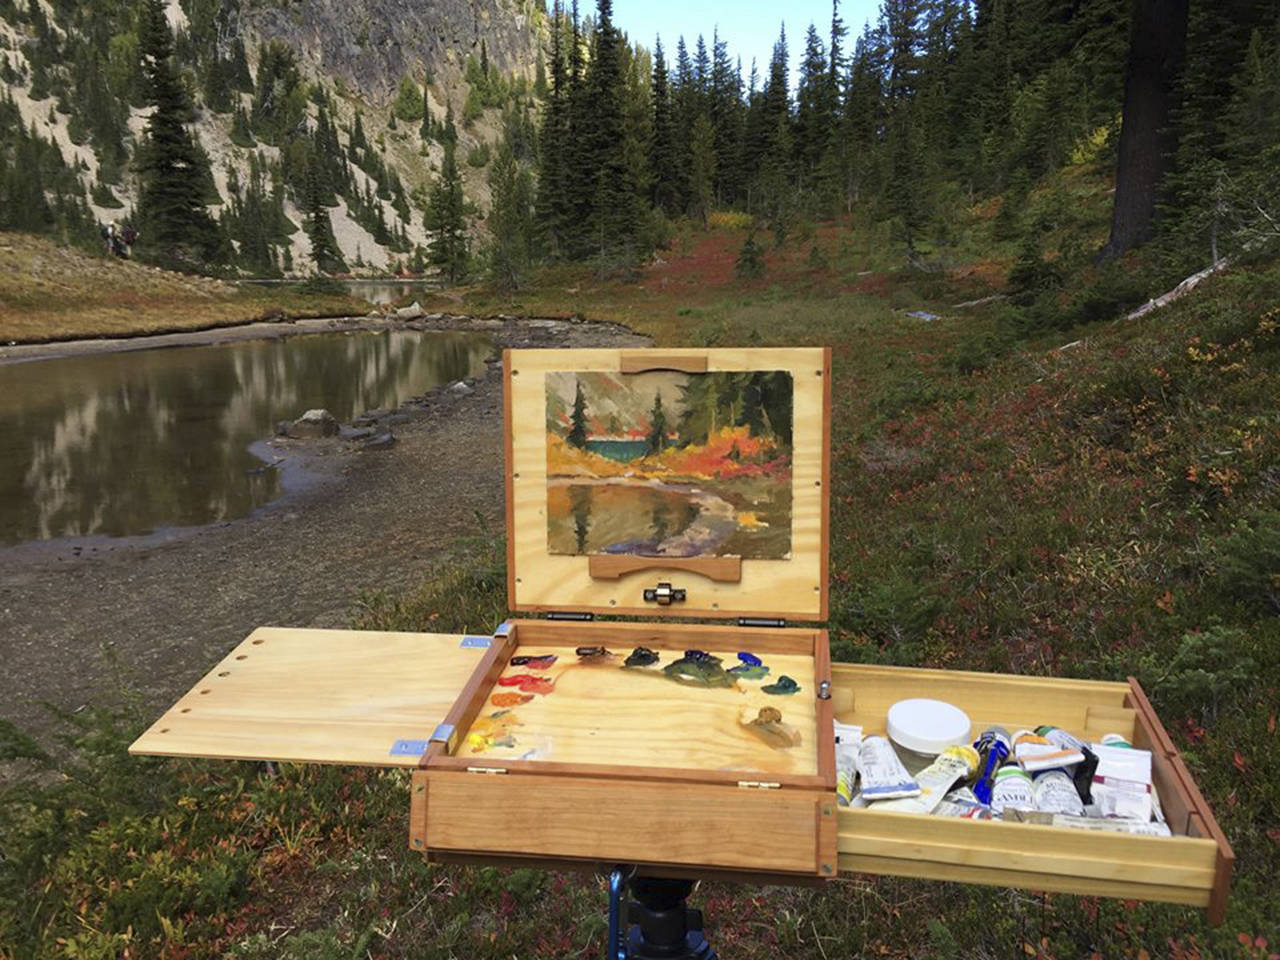 Plein air painter on his favorite backcountry spots, easels